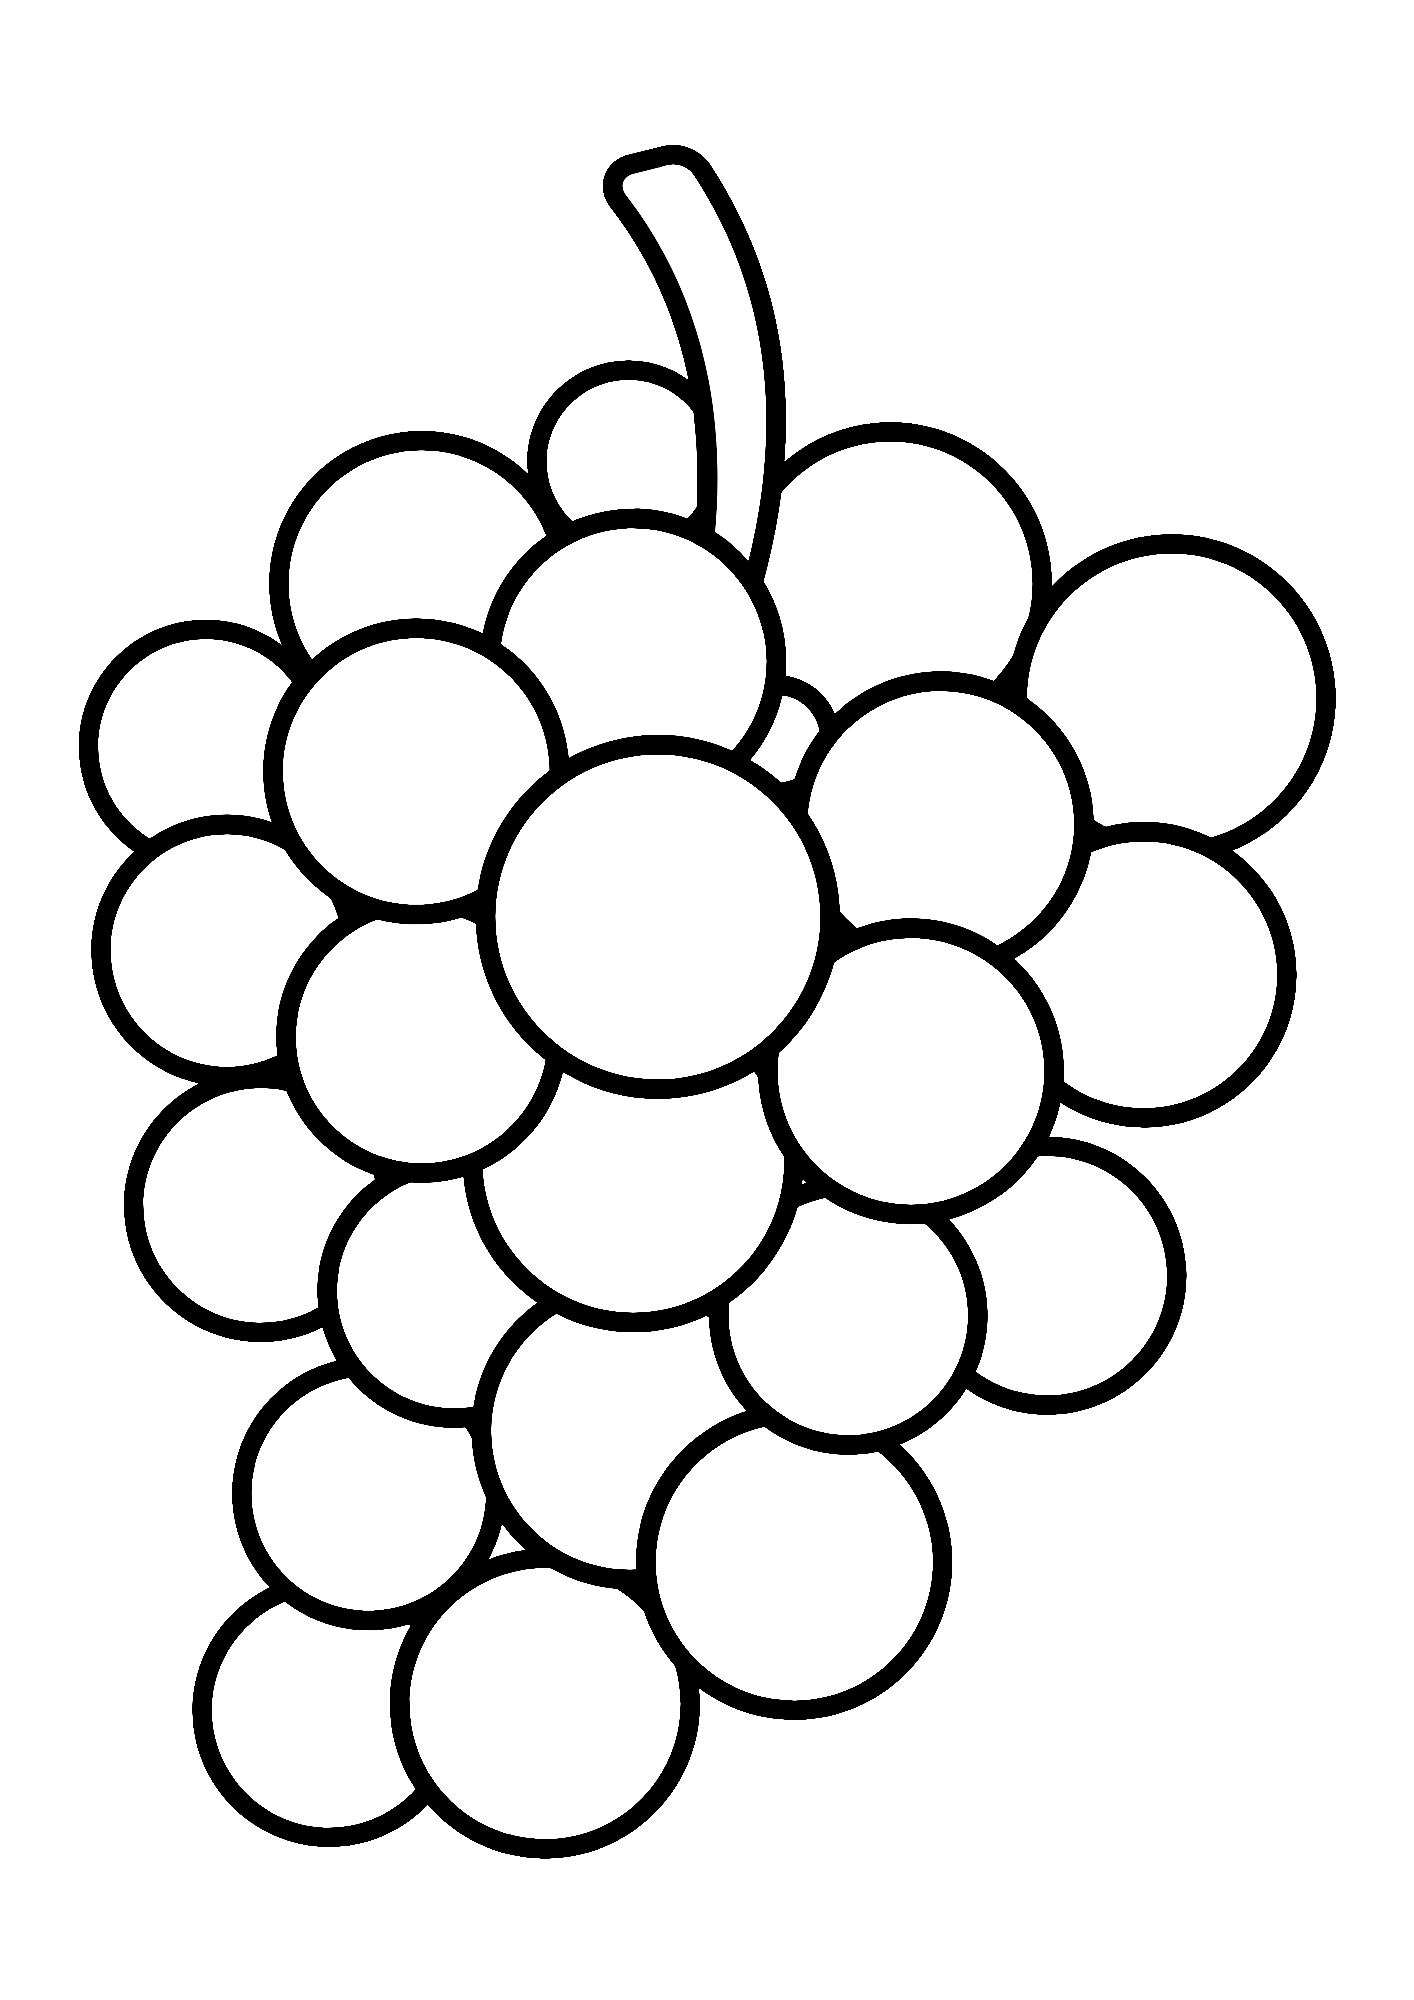 Cute Grapes Image For Children Coloring Pages